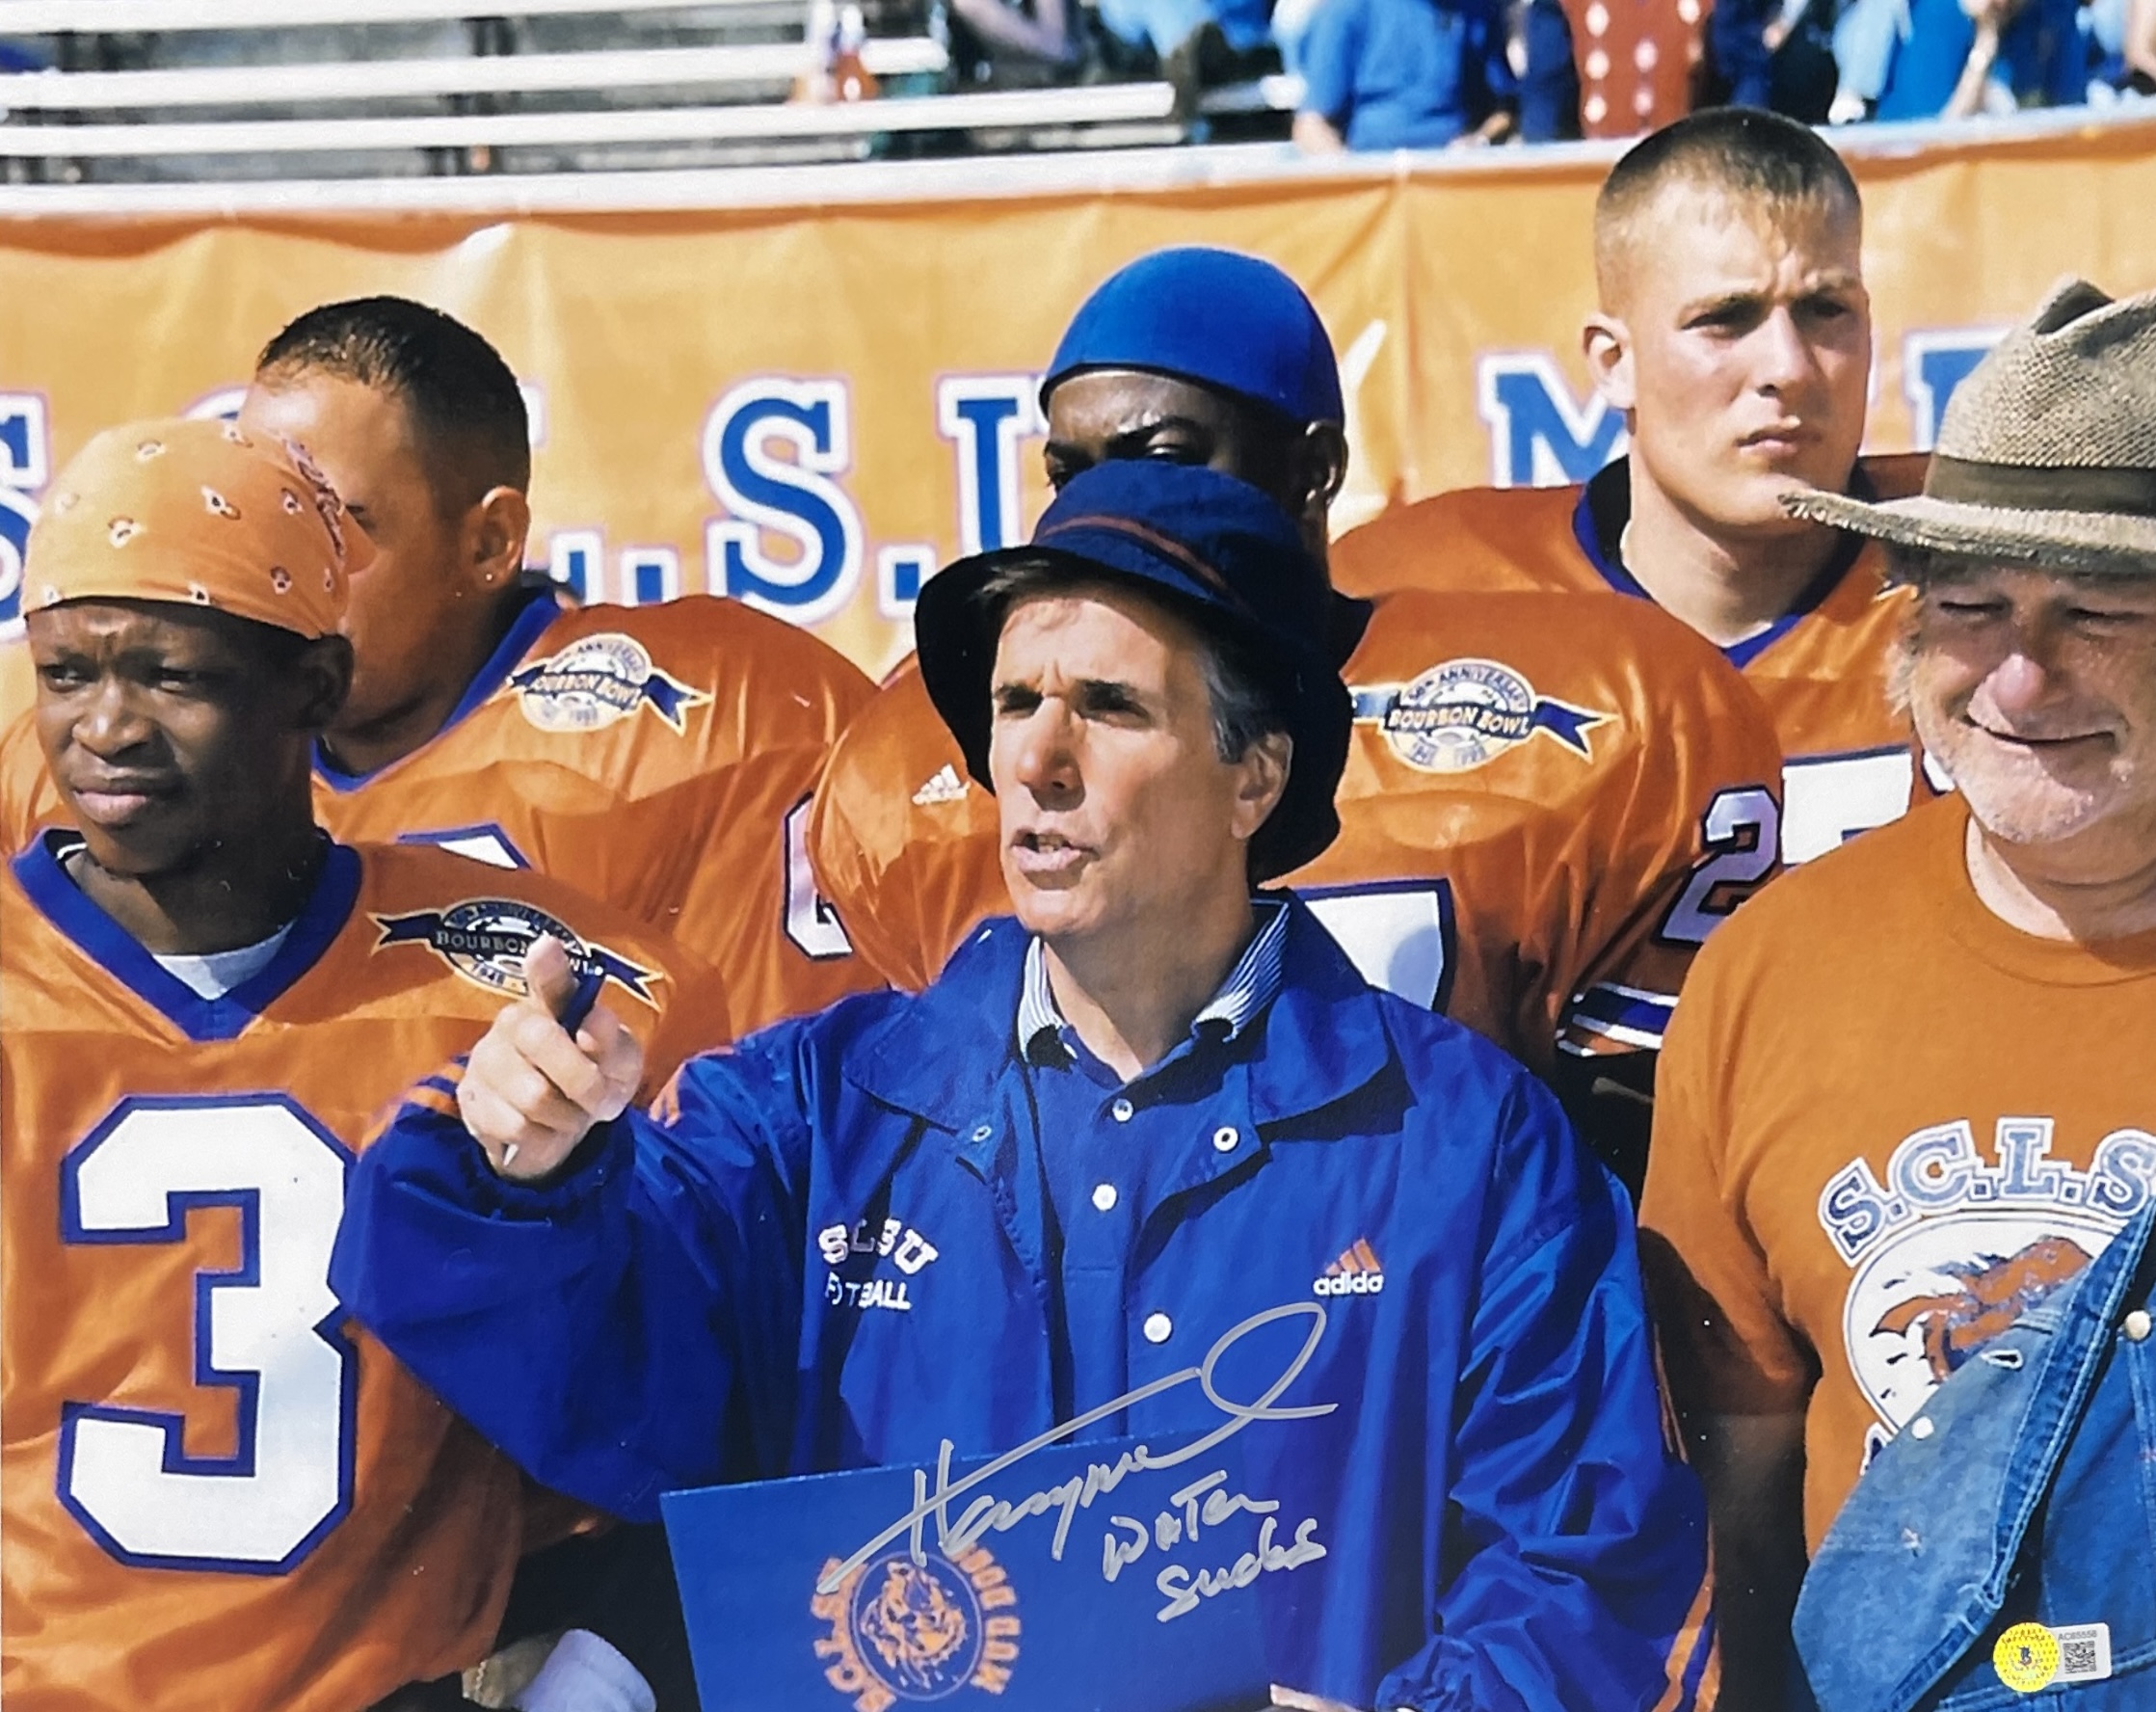 Henry Winkler Autographed/Signed The Water Boy 16x20 Photo Beckett